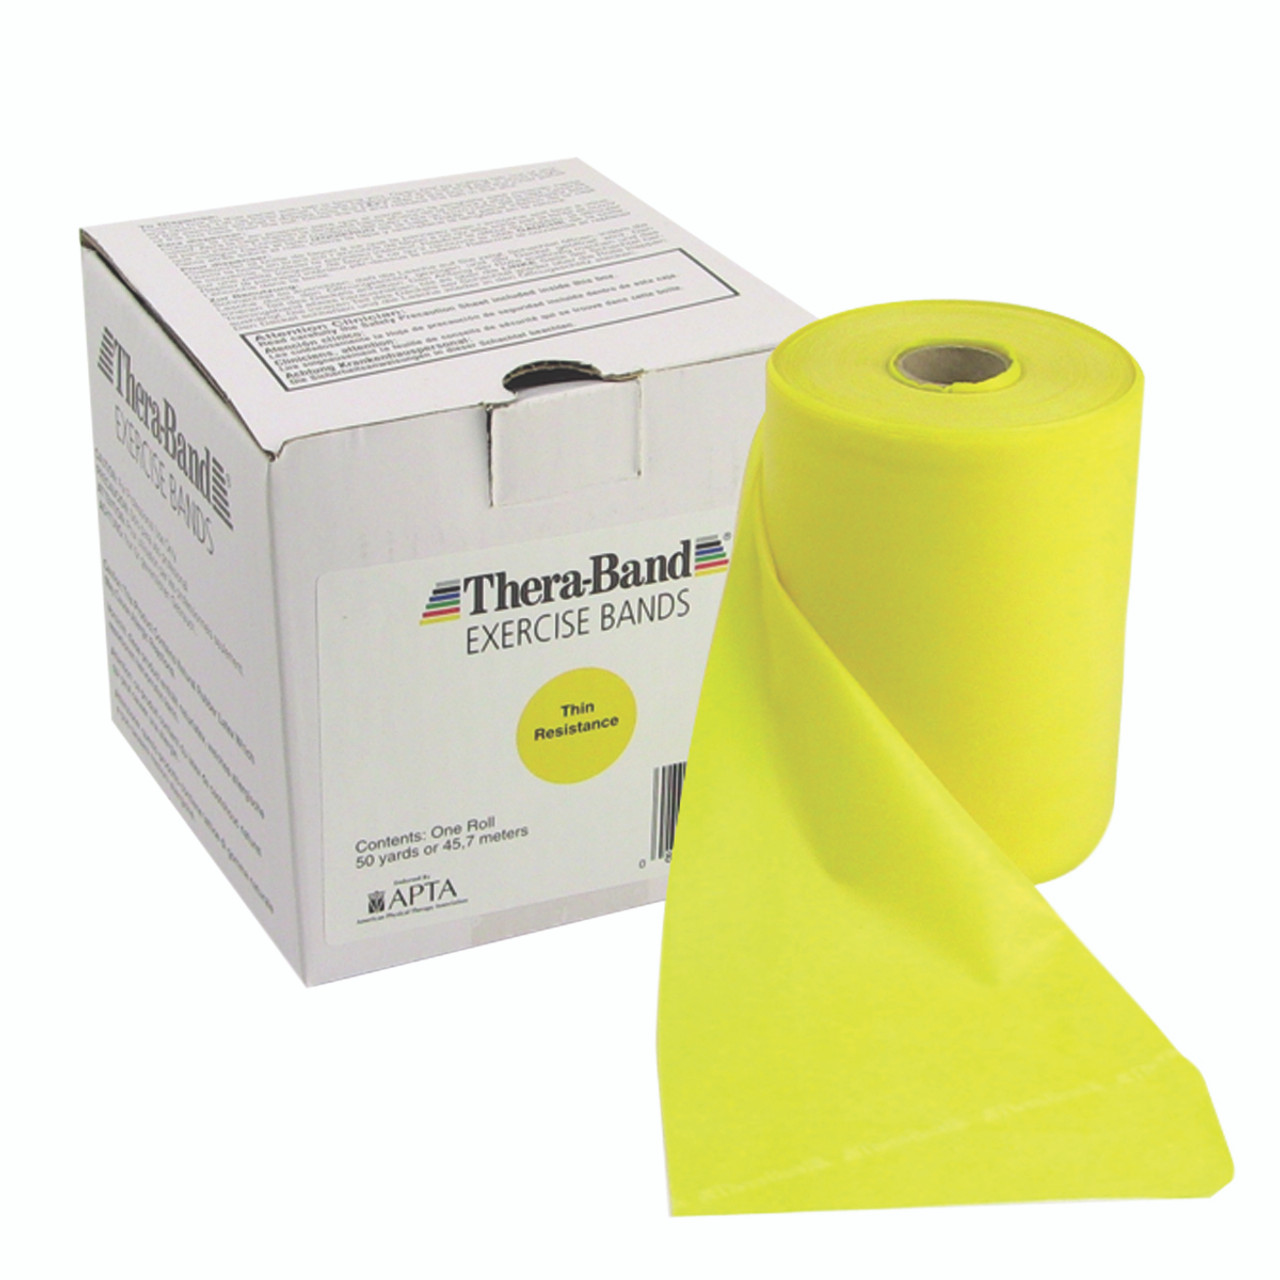 TheraBand¨ exercise band - Twin-Pak 100 yard roll - Yellow - thin (2, 50-yd boxes)